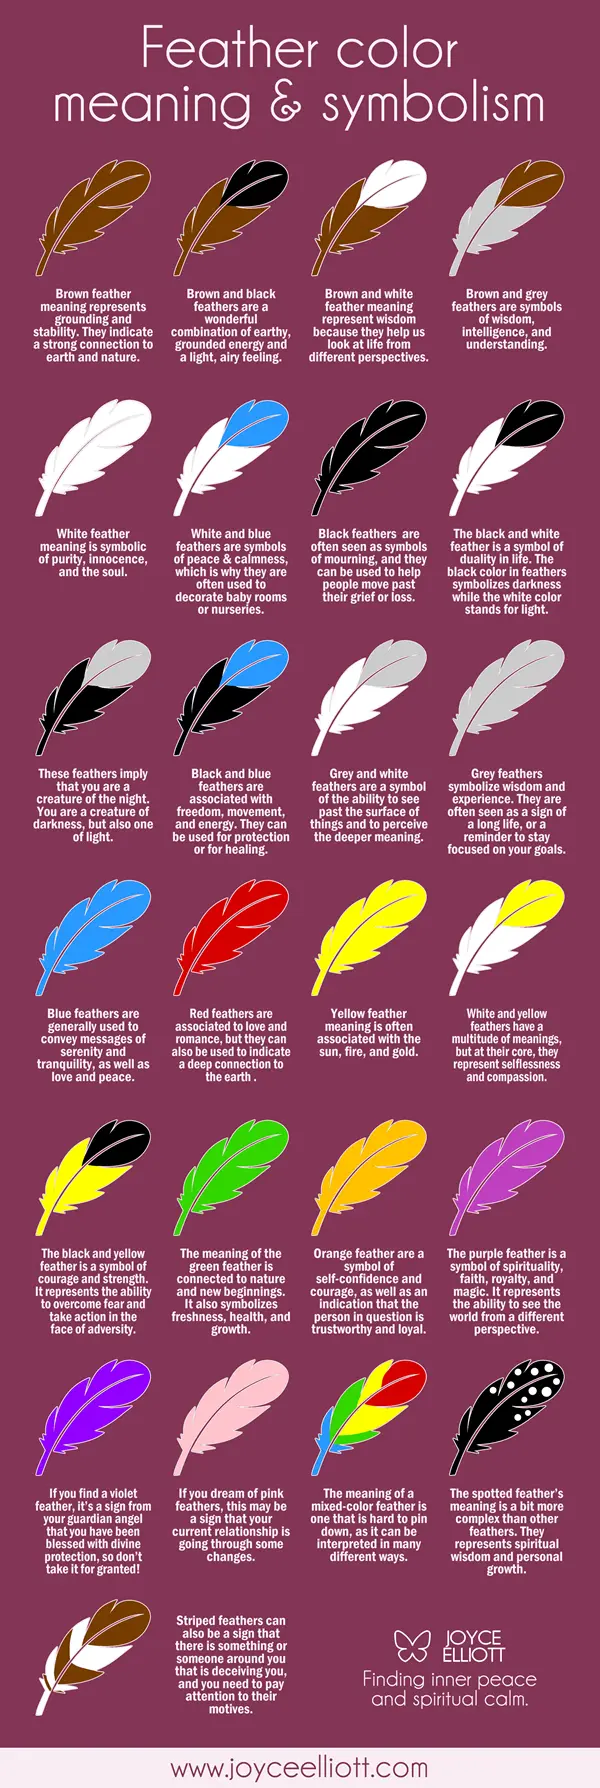 feather color meaning and symbolism